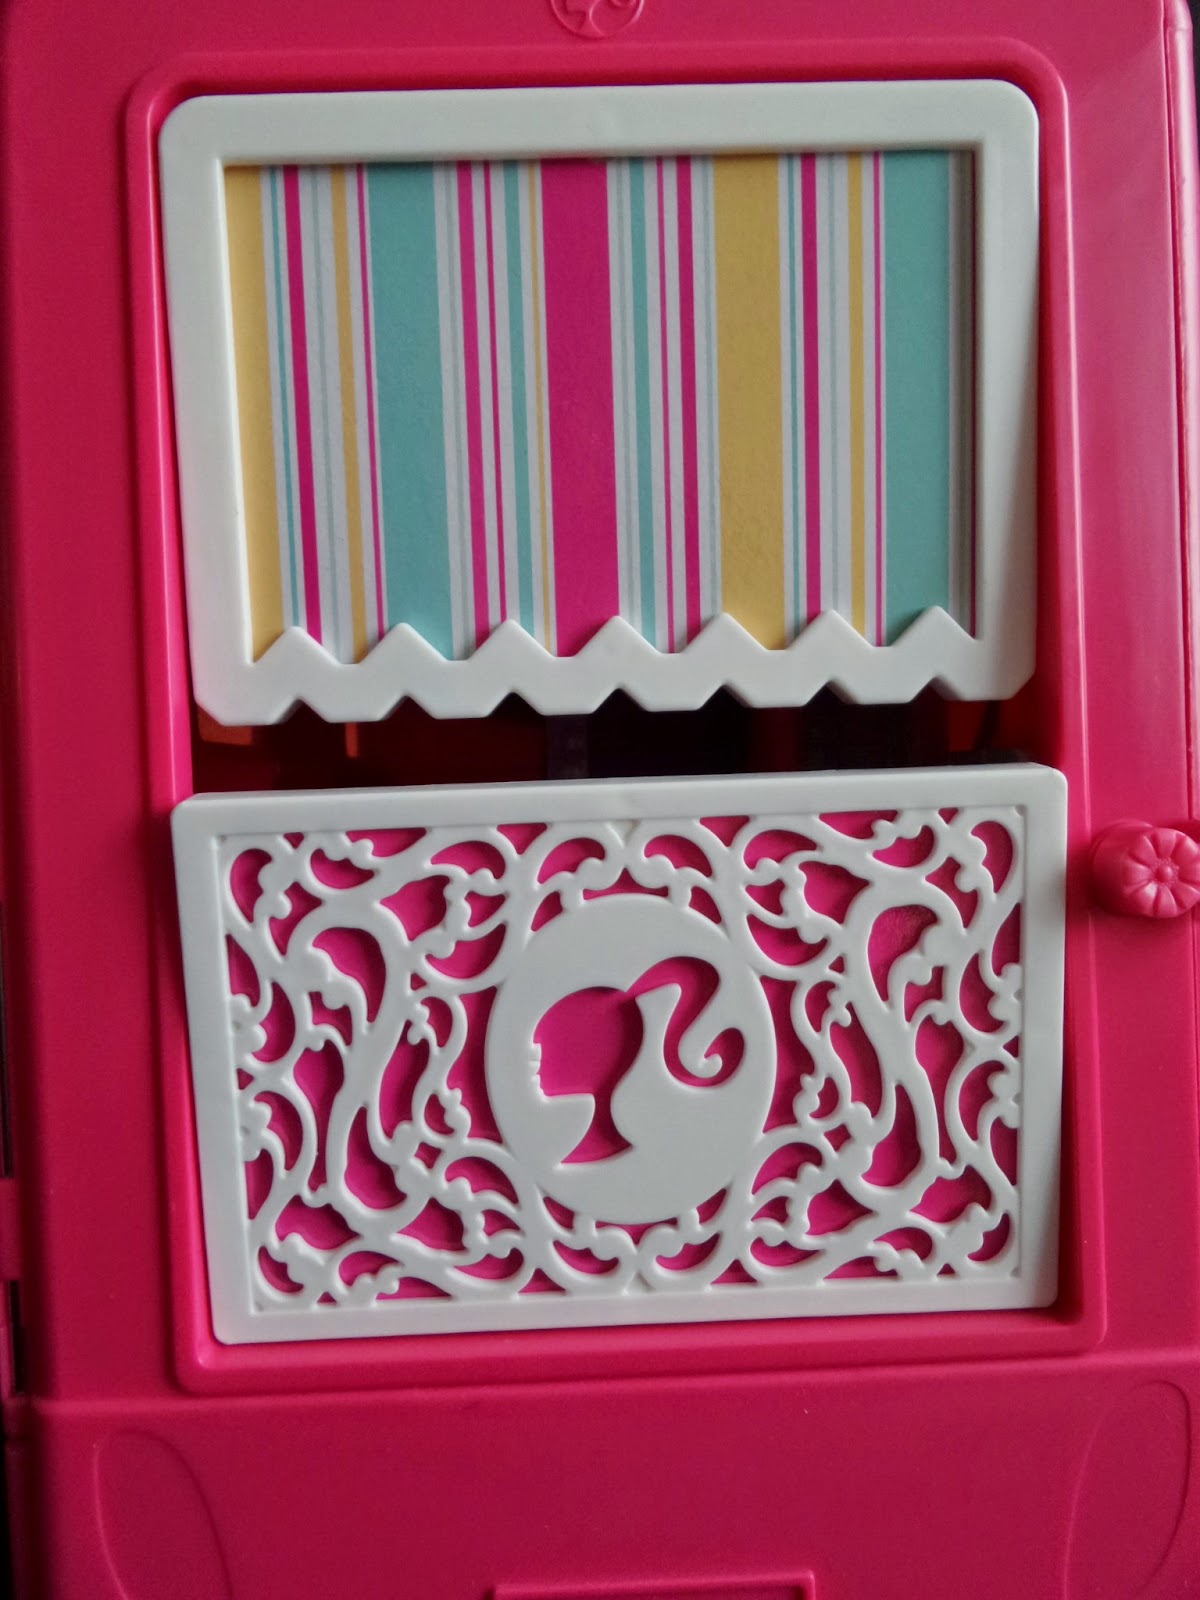 The outside of the back panel of the Barbie Glam Camper #Review